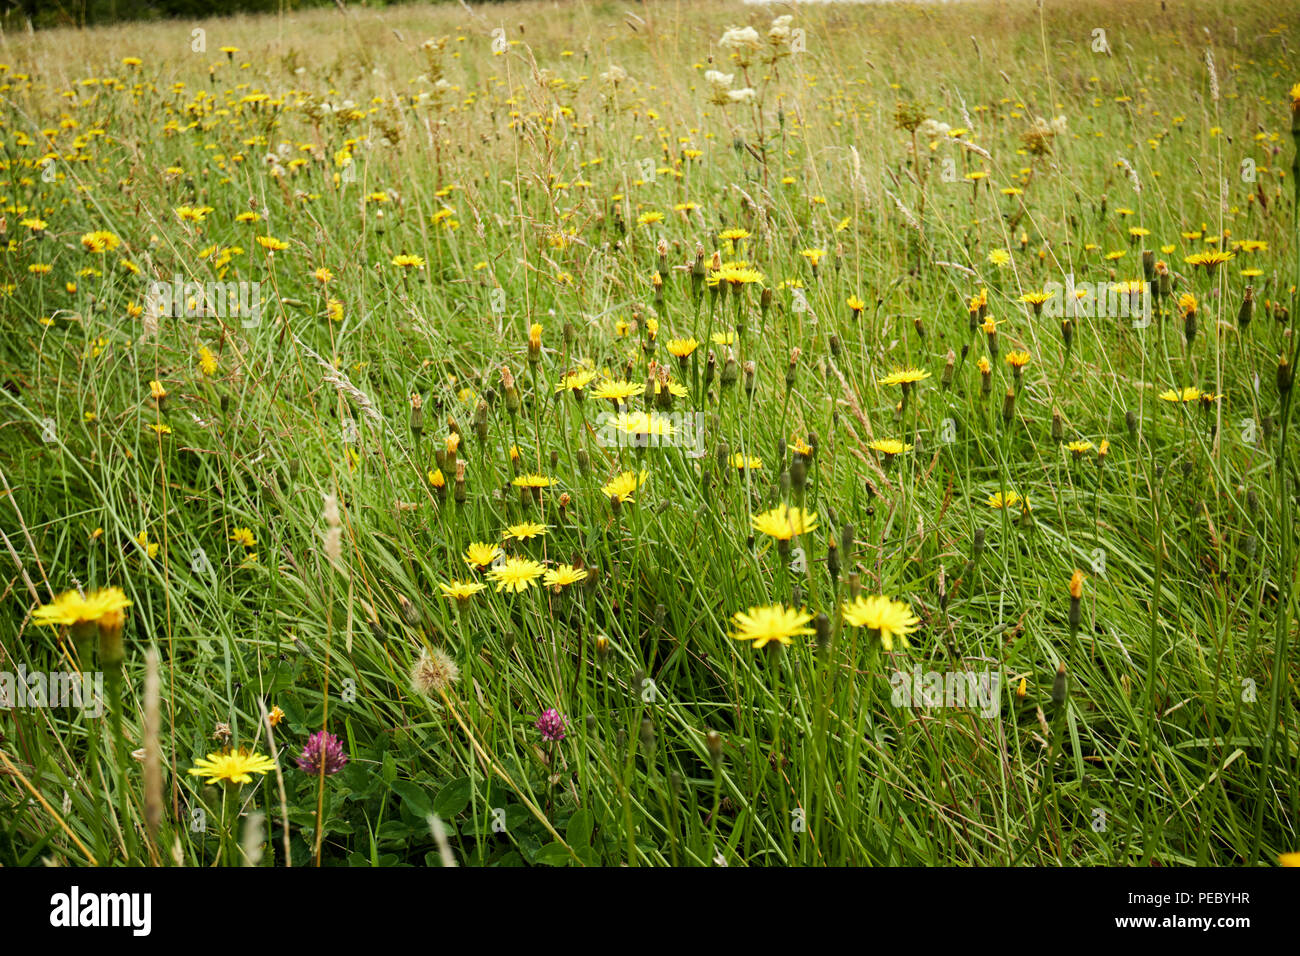 wild flowers growing in a field pasture ready to cut for sileage in ireland Stock Photo